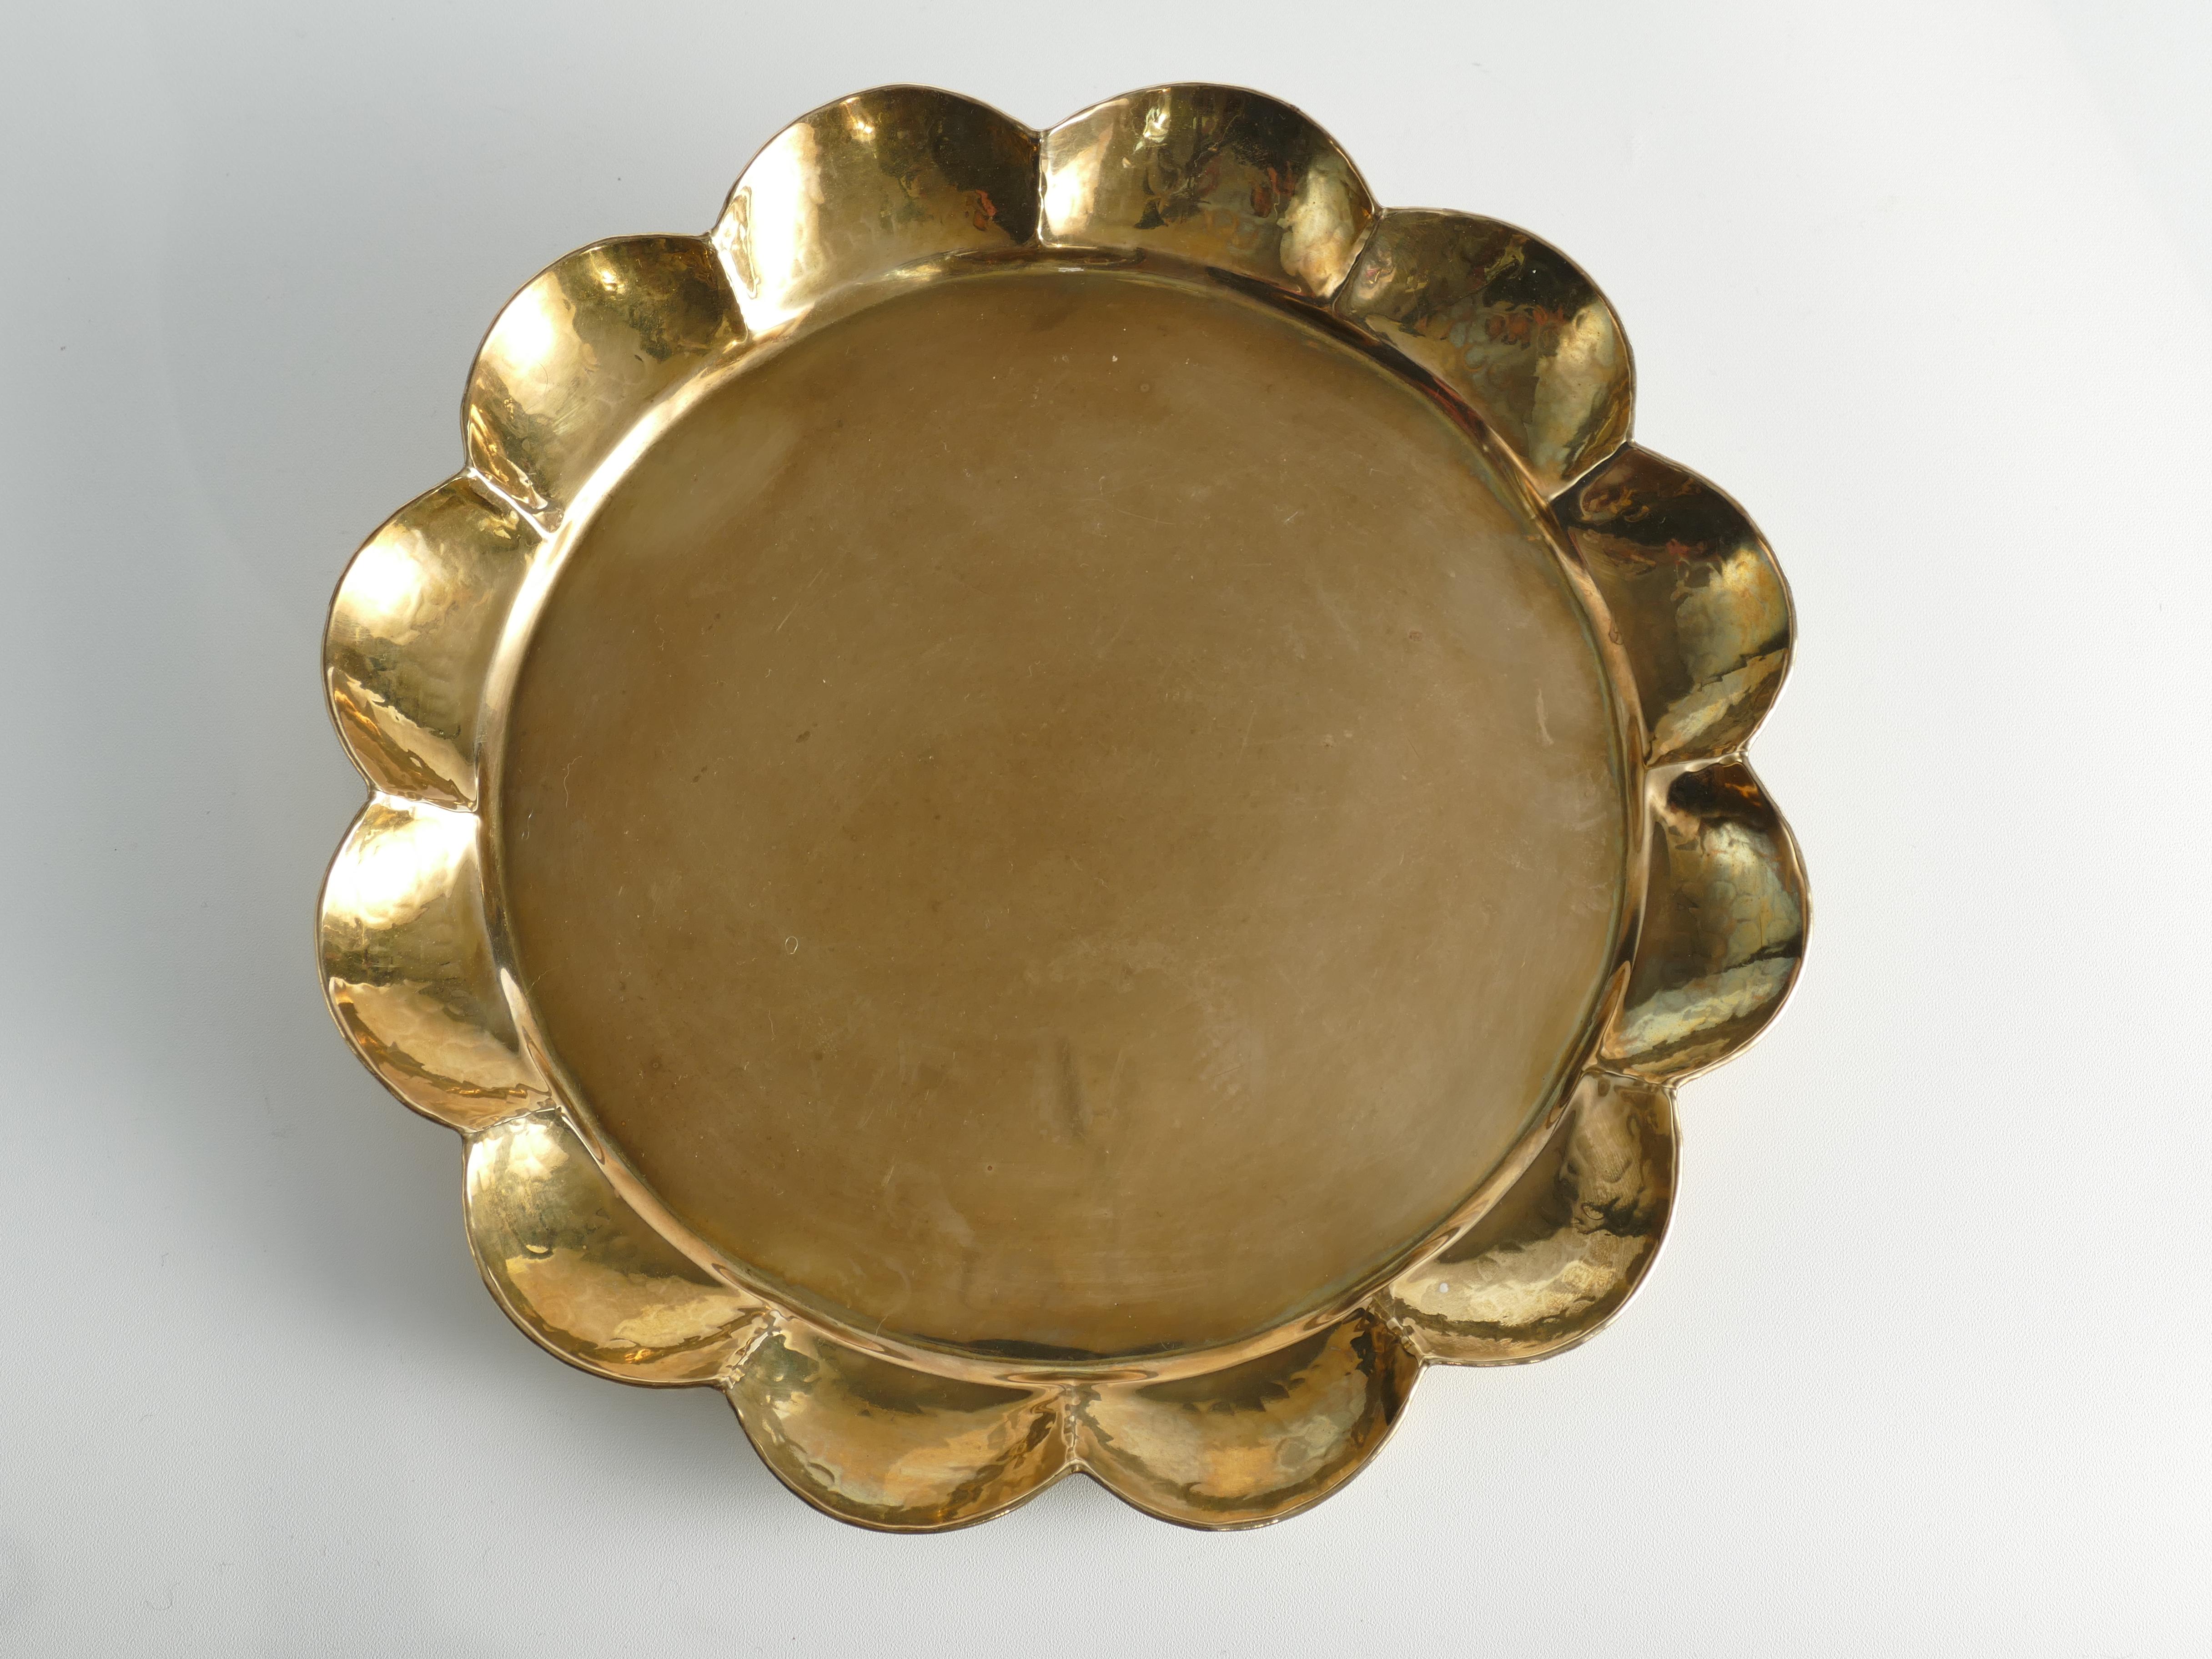 Masterfully crafted Hollywood Regency / Swedish grace round brass tray designed by Arvid Johansson (1862-1923), at Arvika Konstsmide, Sweden. The tray has a round shape with a gracefully contoured, hand-hammered edge. Manual operation and stamped